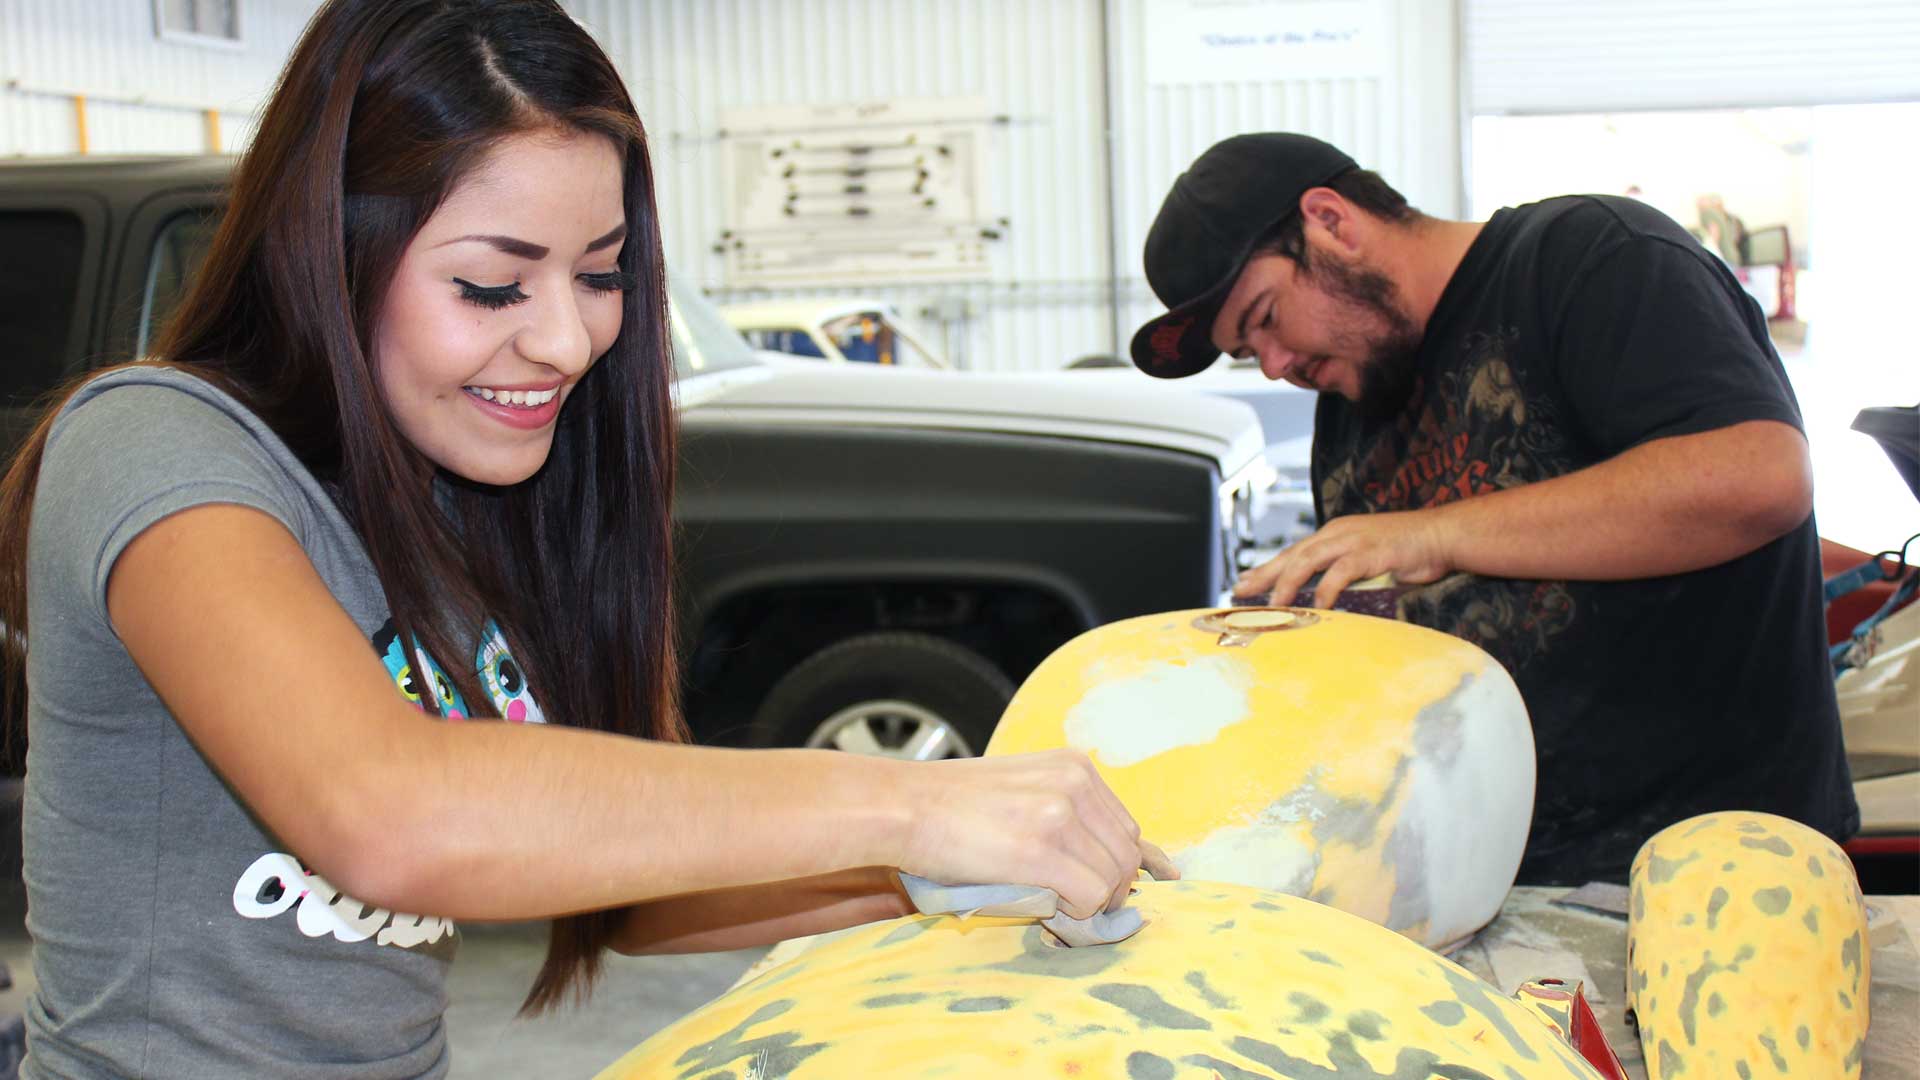 Mojave Community College students learning hands-on skills